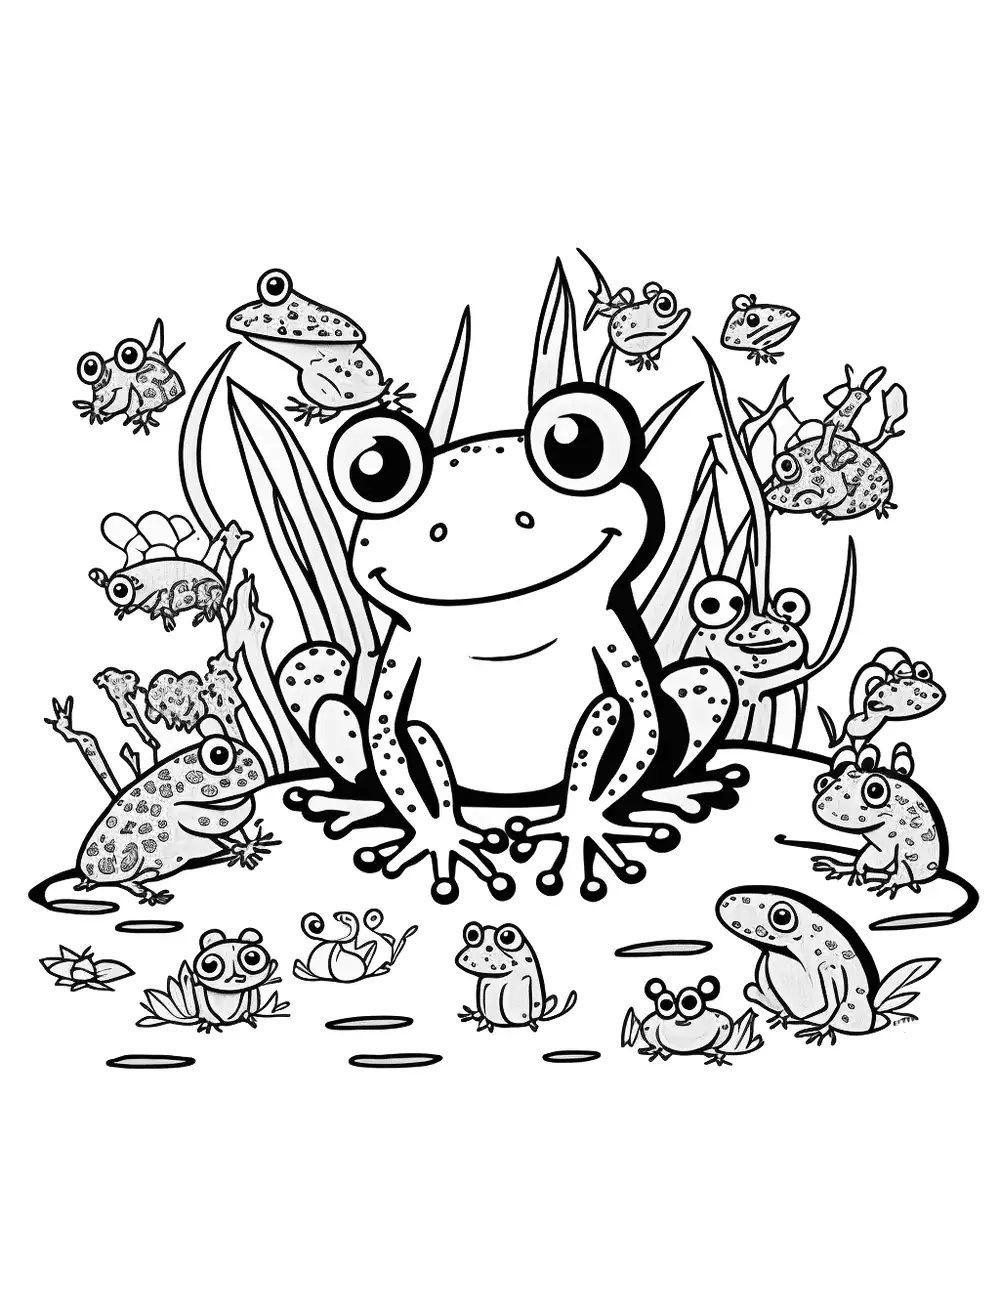 Frogs And Bugs Coloring Page - A group of frogs hunting and eating bugs